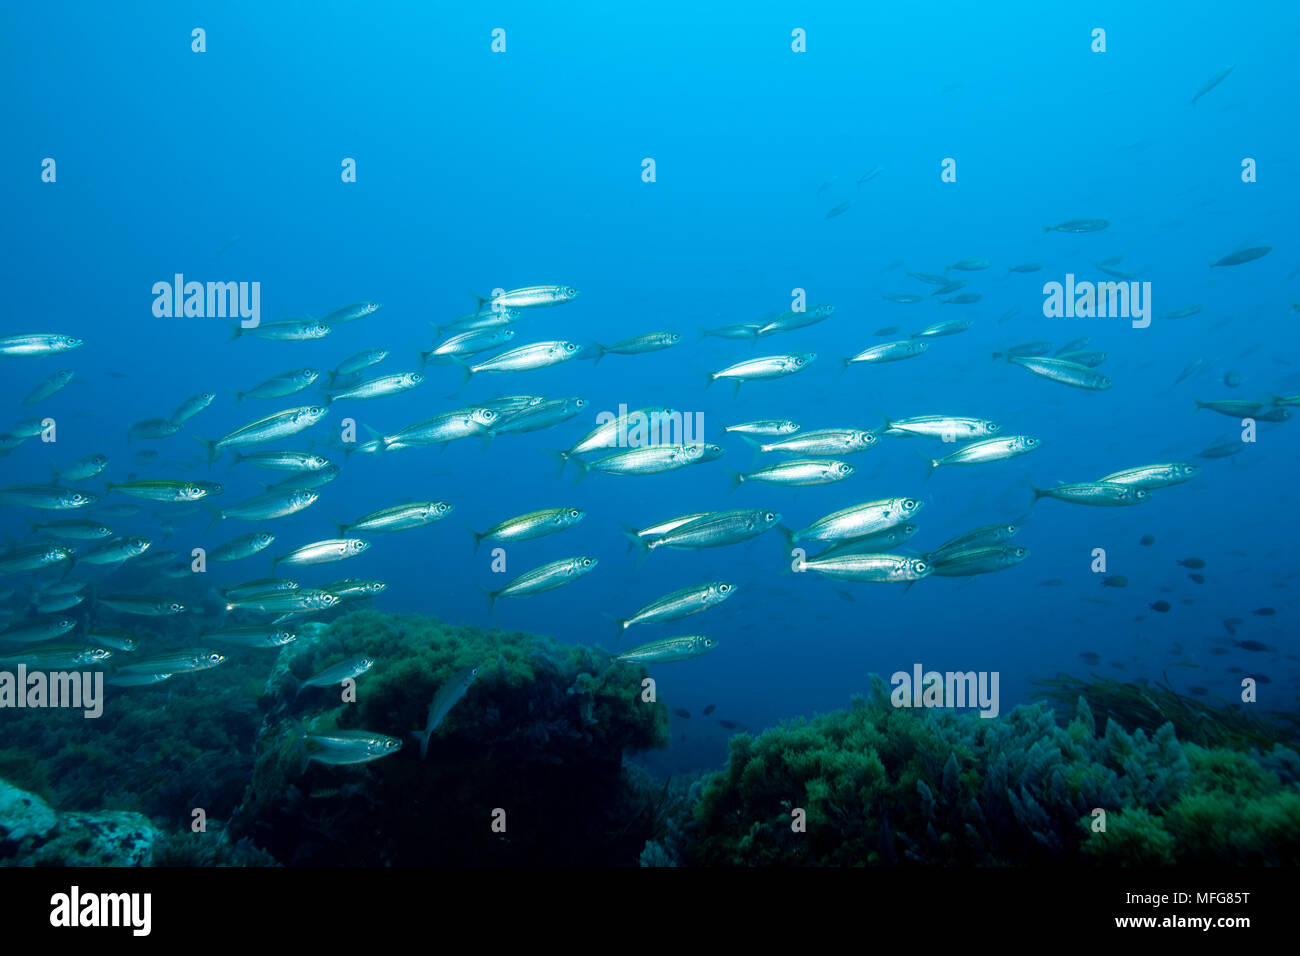 Shoal of bogue, Boops boops, Marettimo Island, small mountainous island of Egadi group, on the north western coast of Sicily, Italy  Date: 23.07.08  R Stock Photo